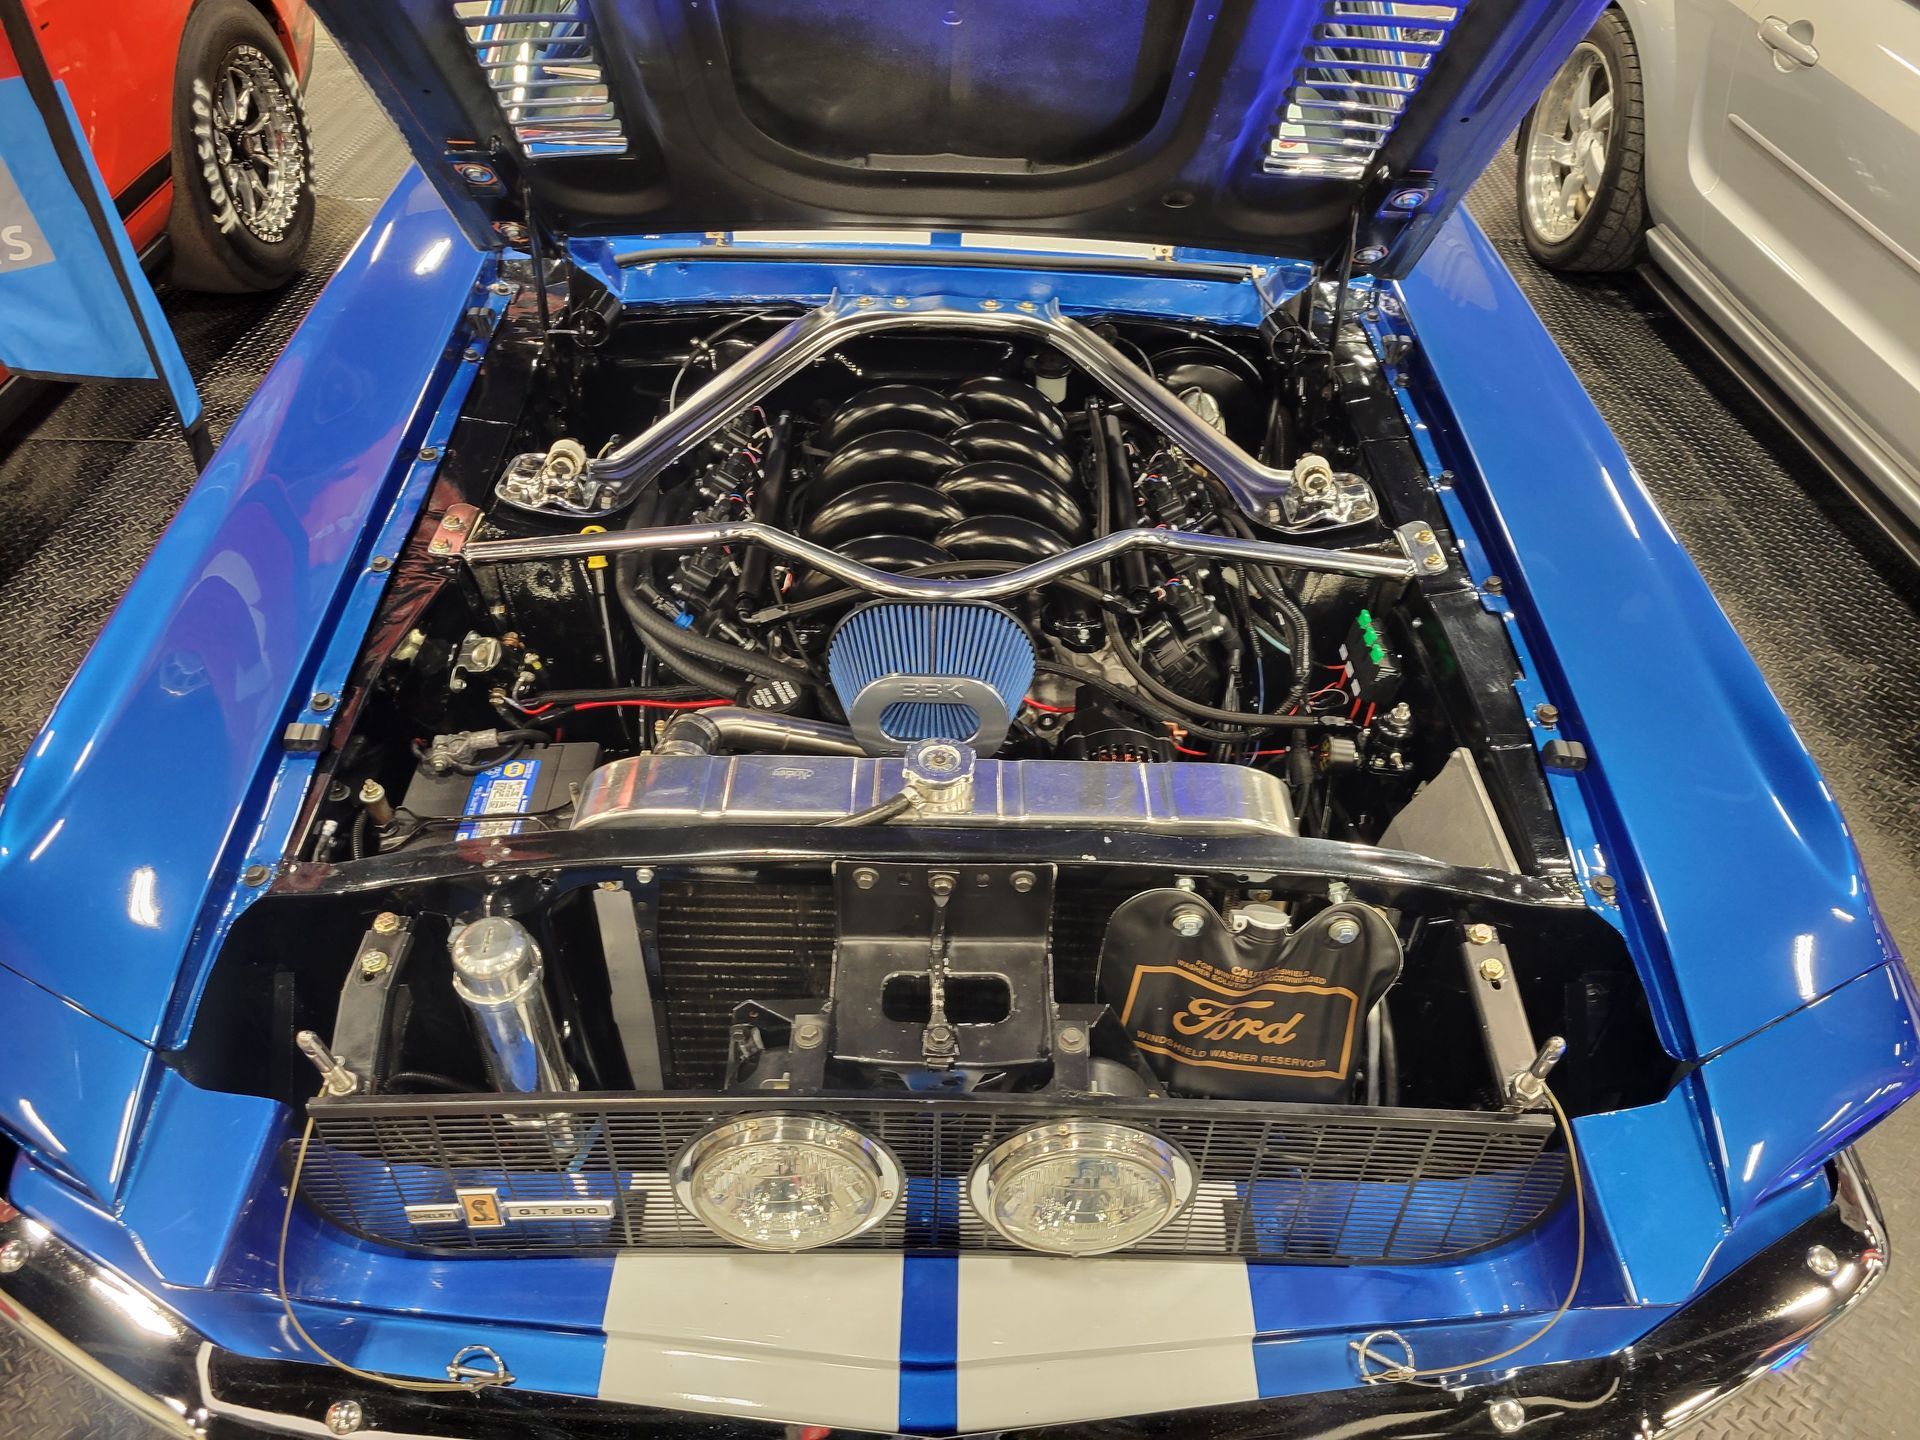 Two 7.3L swapped Mustangs at world of wheels in calgary in the Lakeview Automotive booth 